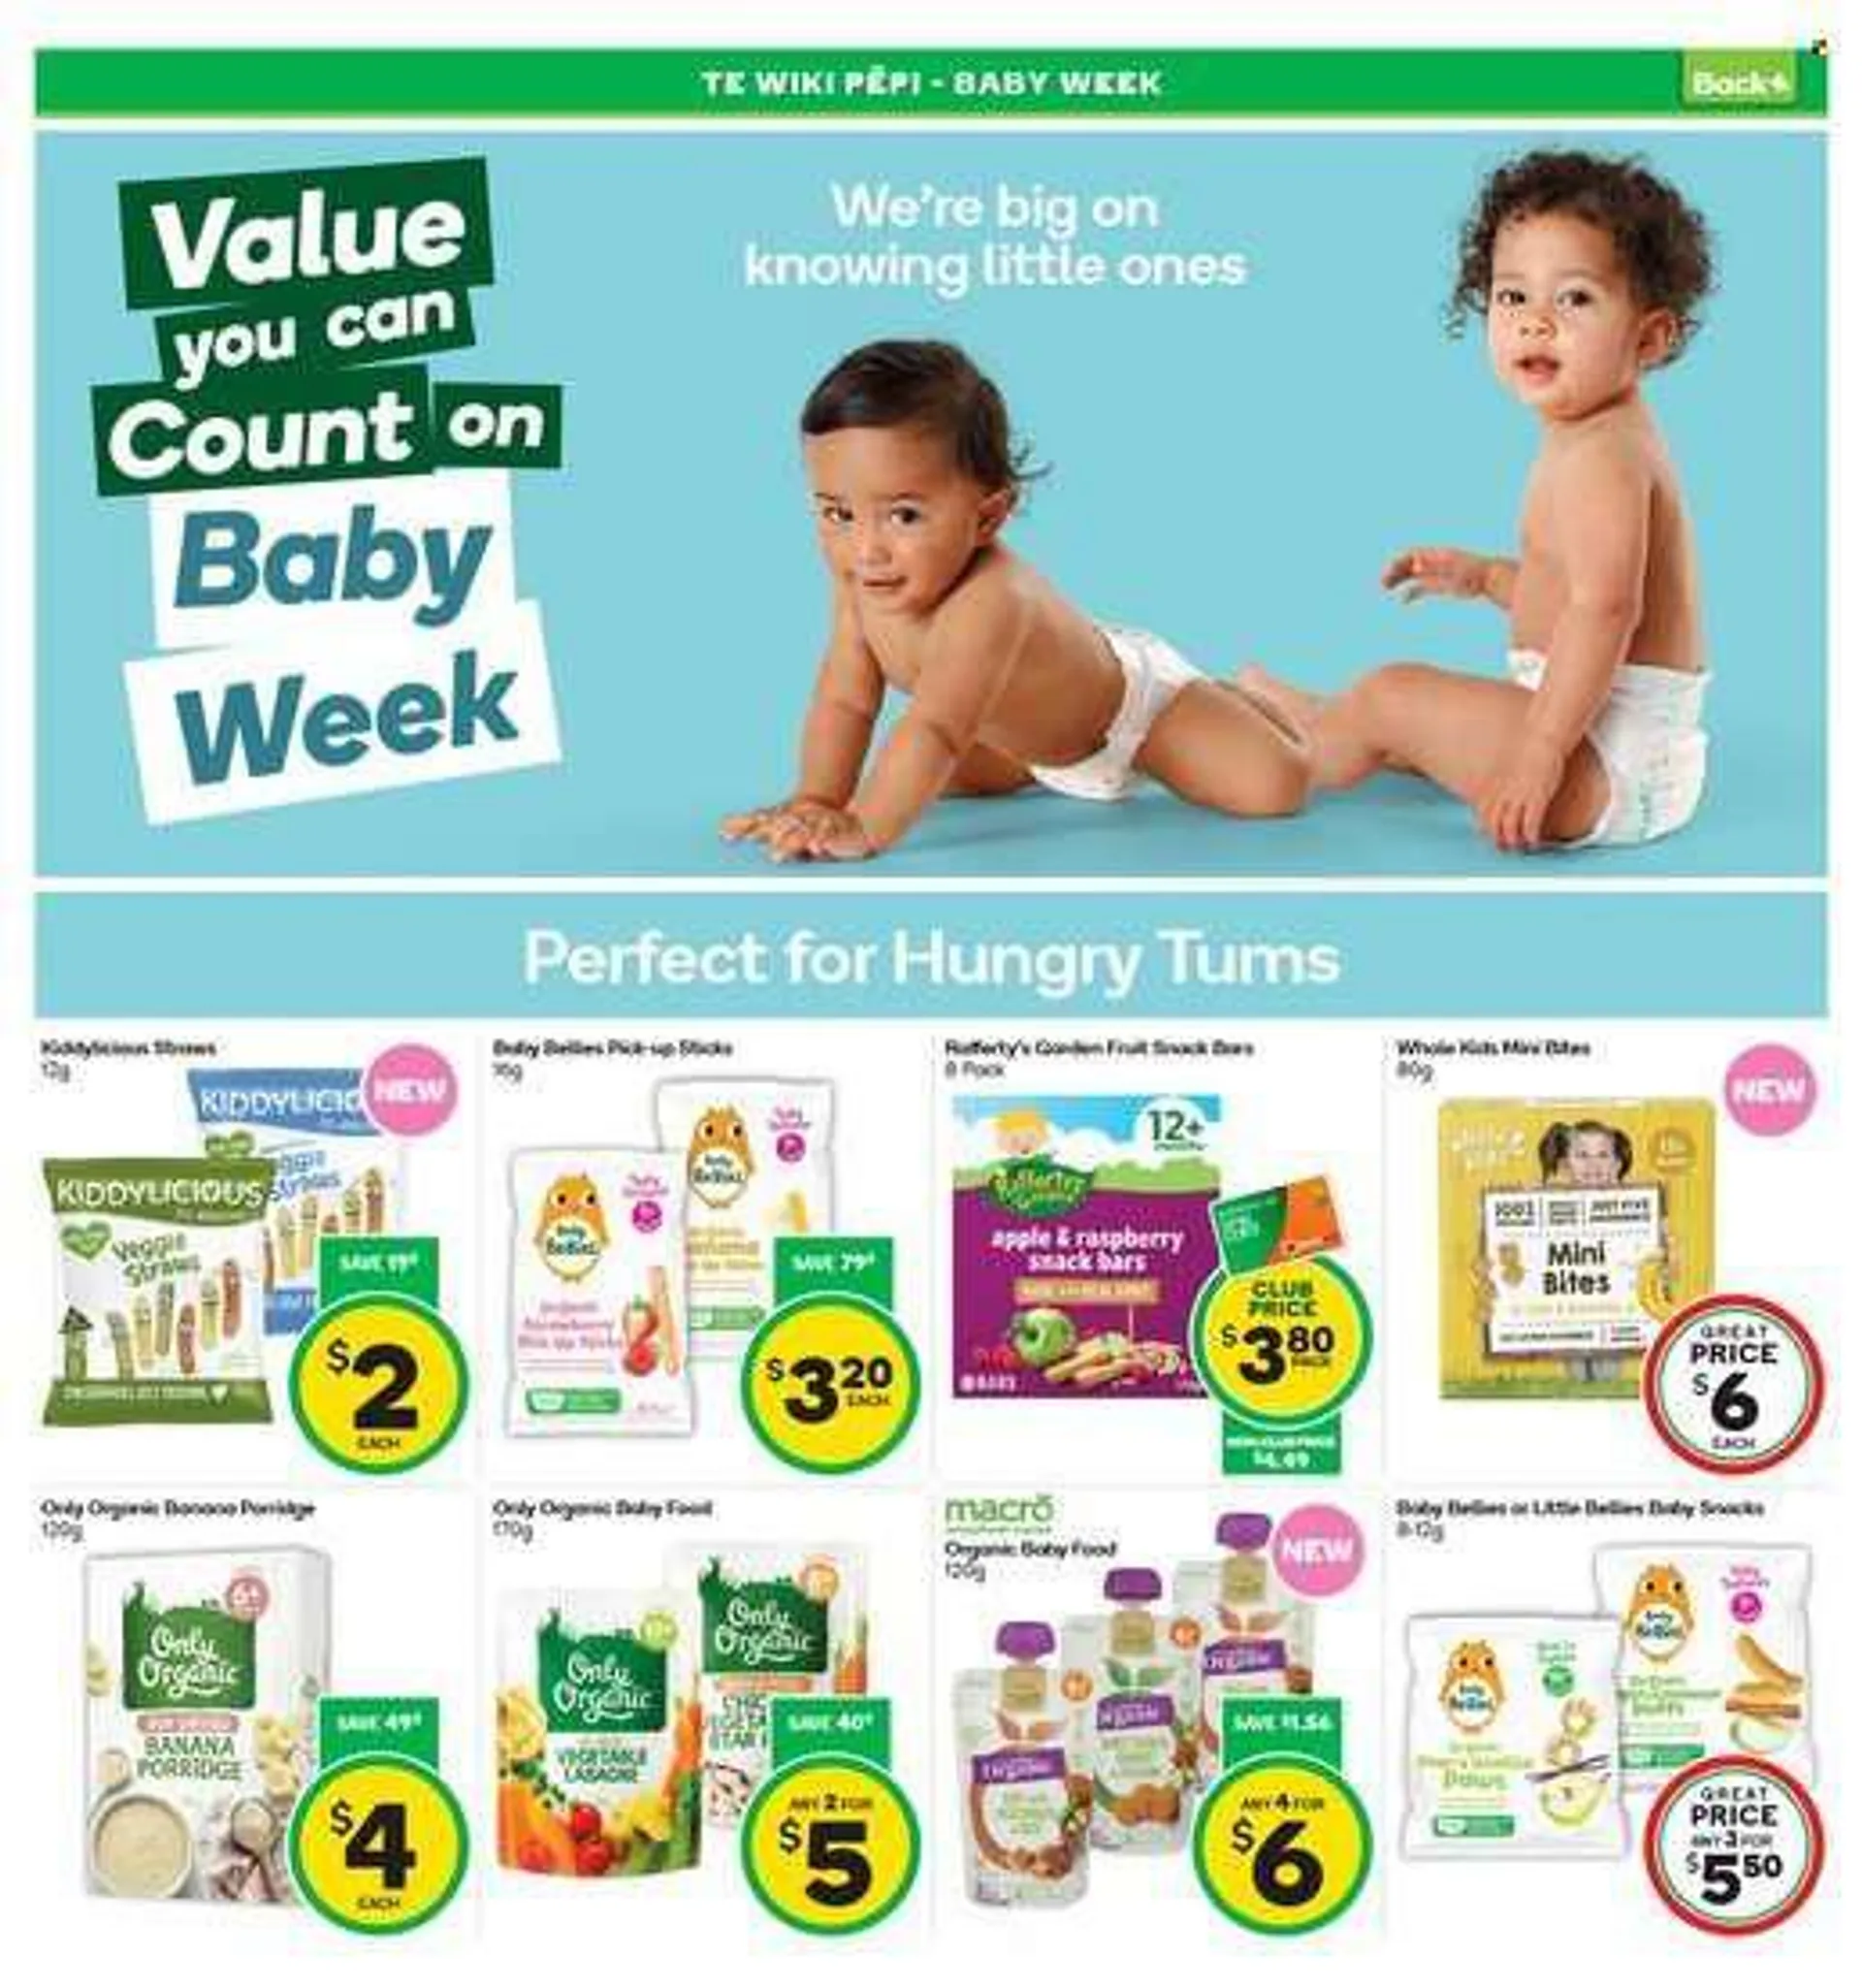 Countdown mailer - 20.06.2022 - 26.06.2022 - Sales products - Puffs, snack, fruit snacks, snack bar, Veggie Straws, porridge, organic baby food, Paws. Page 23.